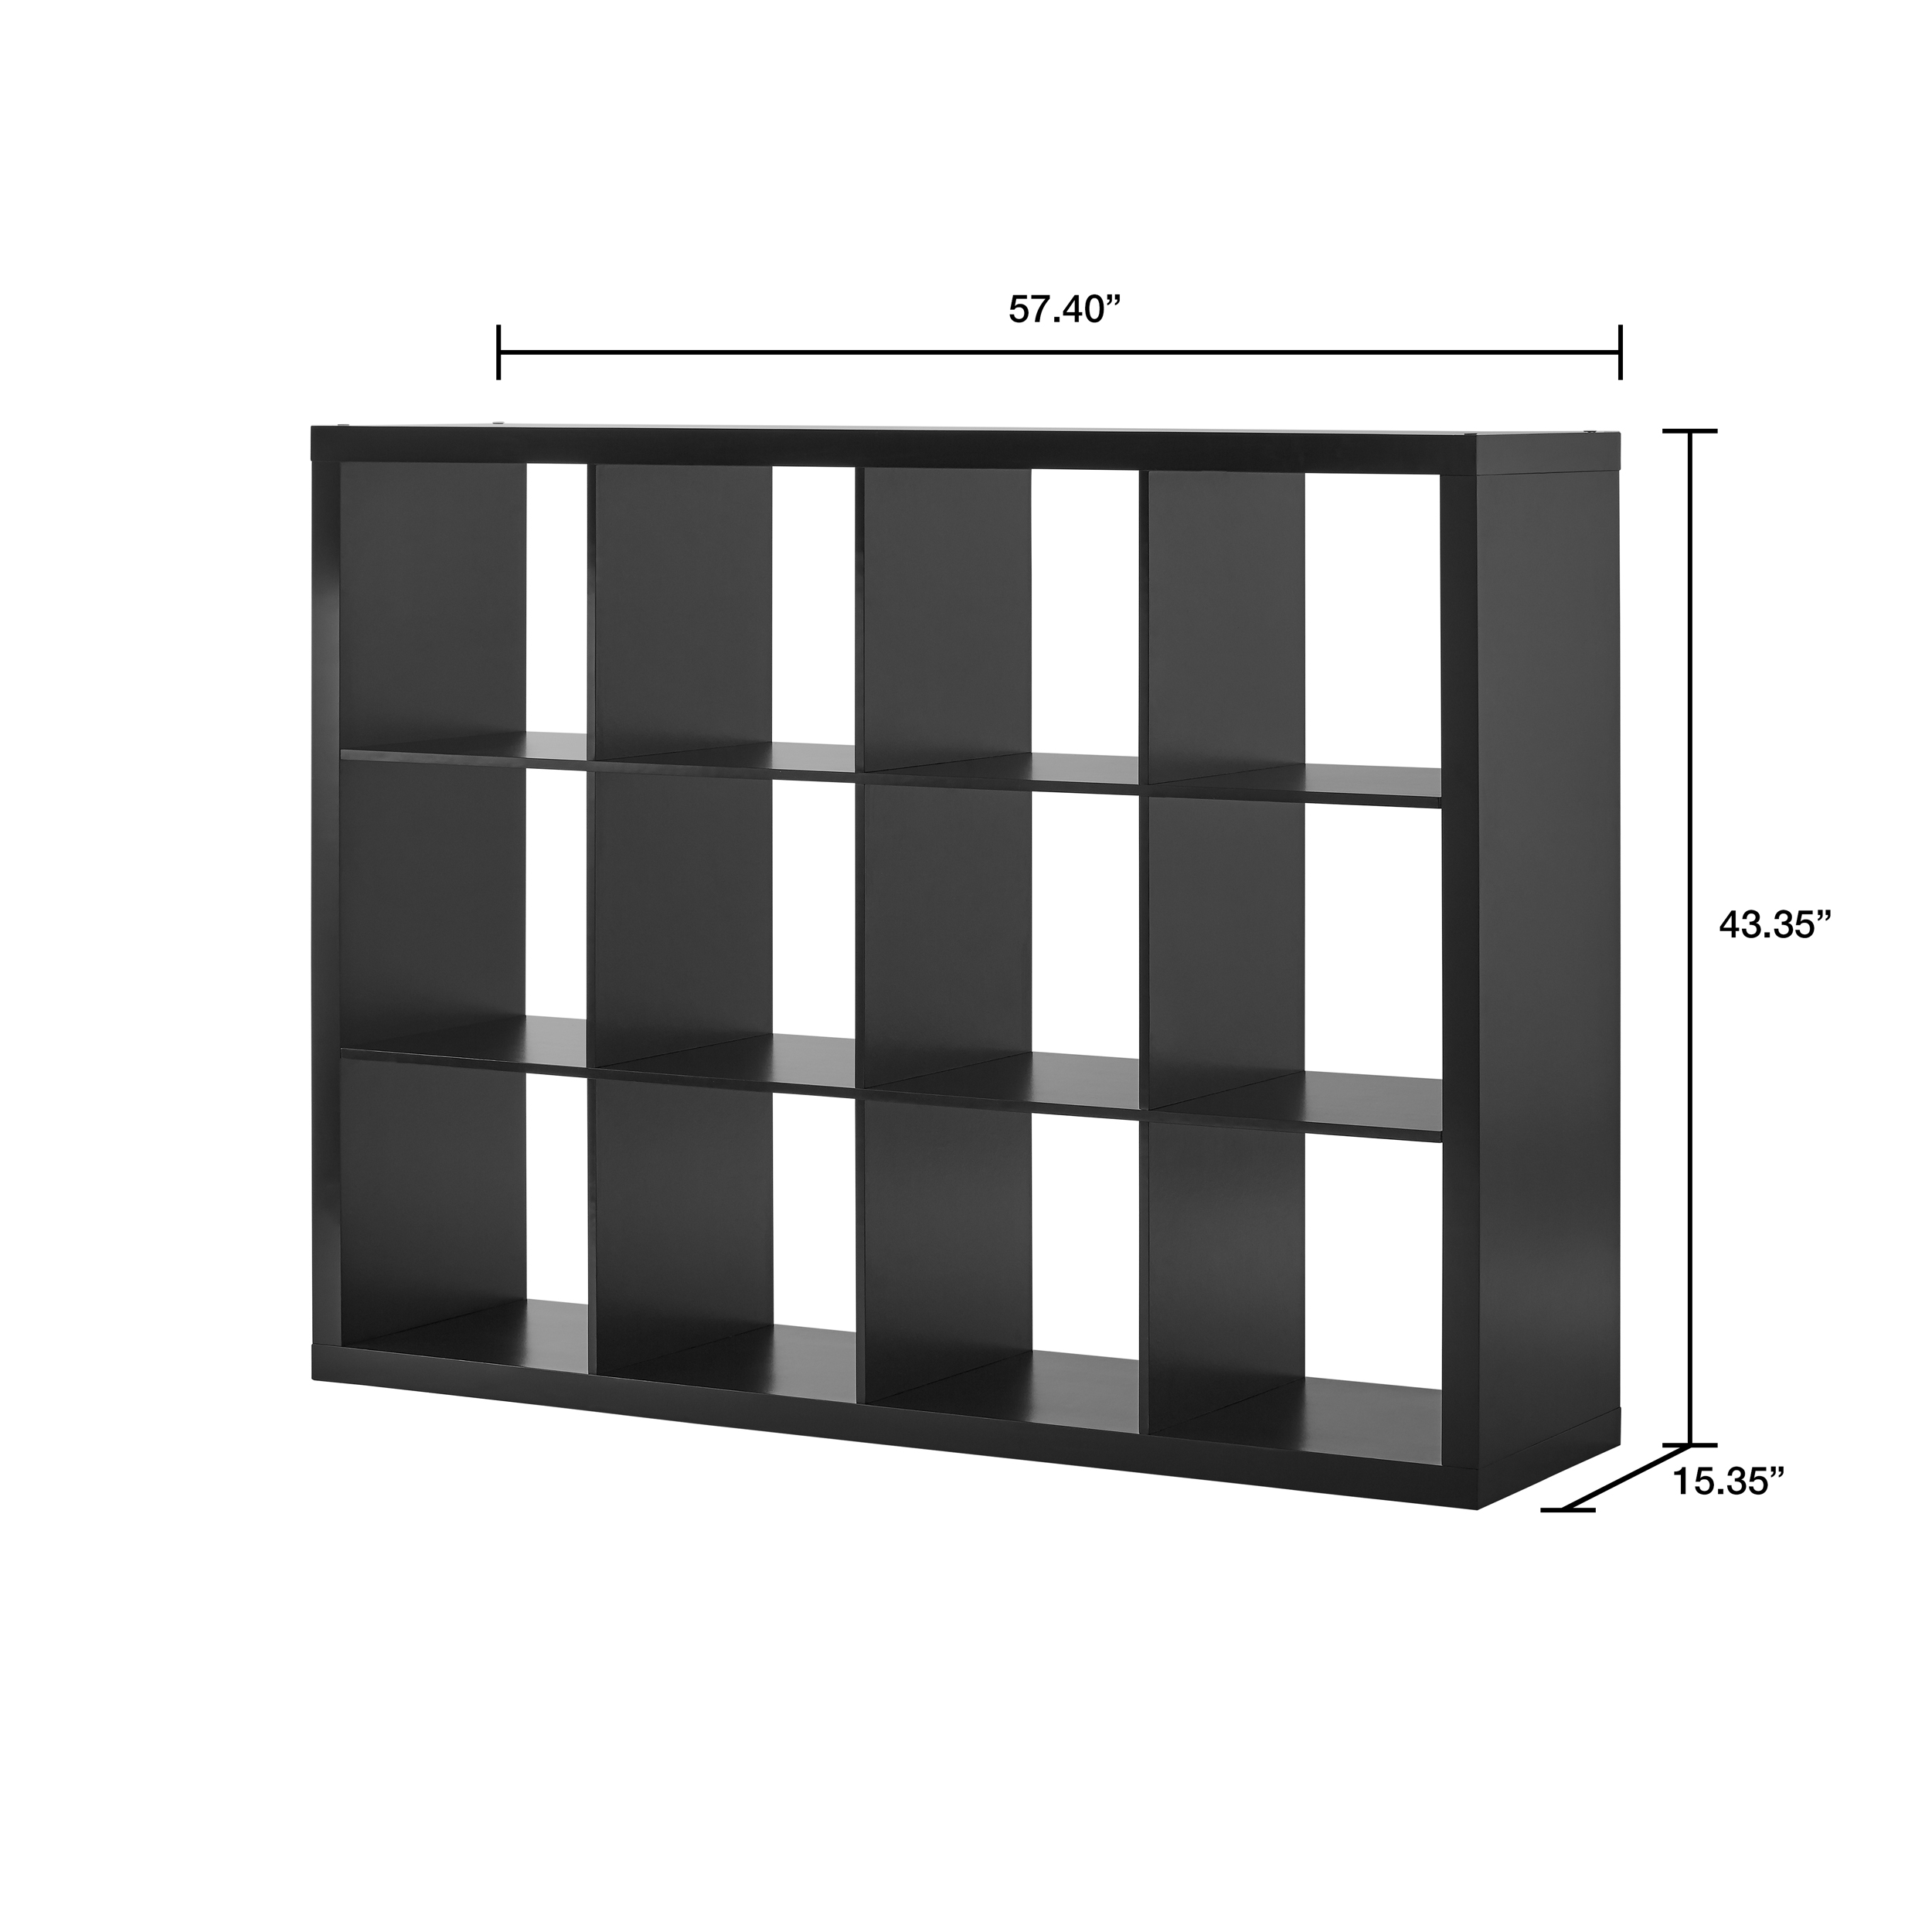 Better Homes & Gardens 12-Cube Storage Organizer, Solid Black - image 4 of 6